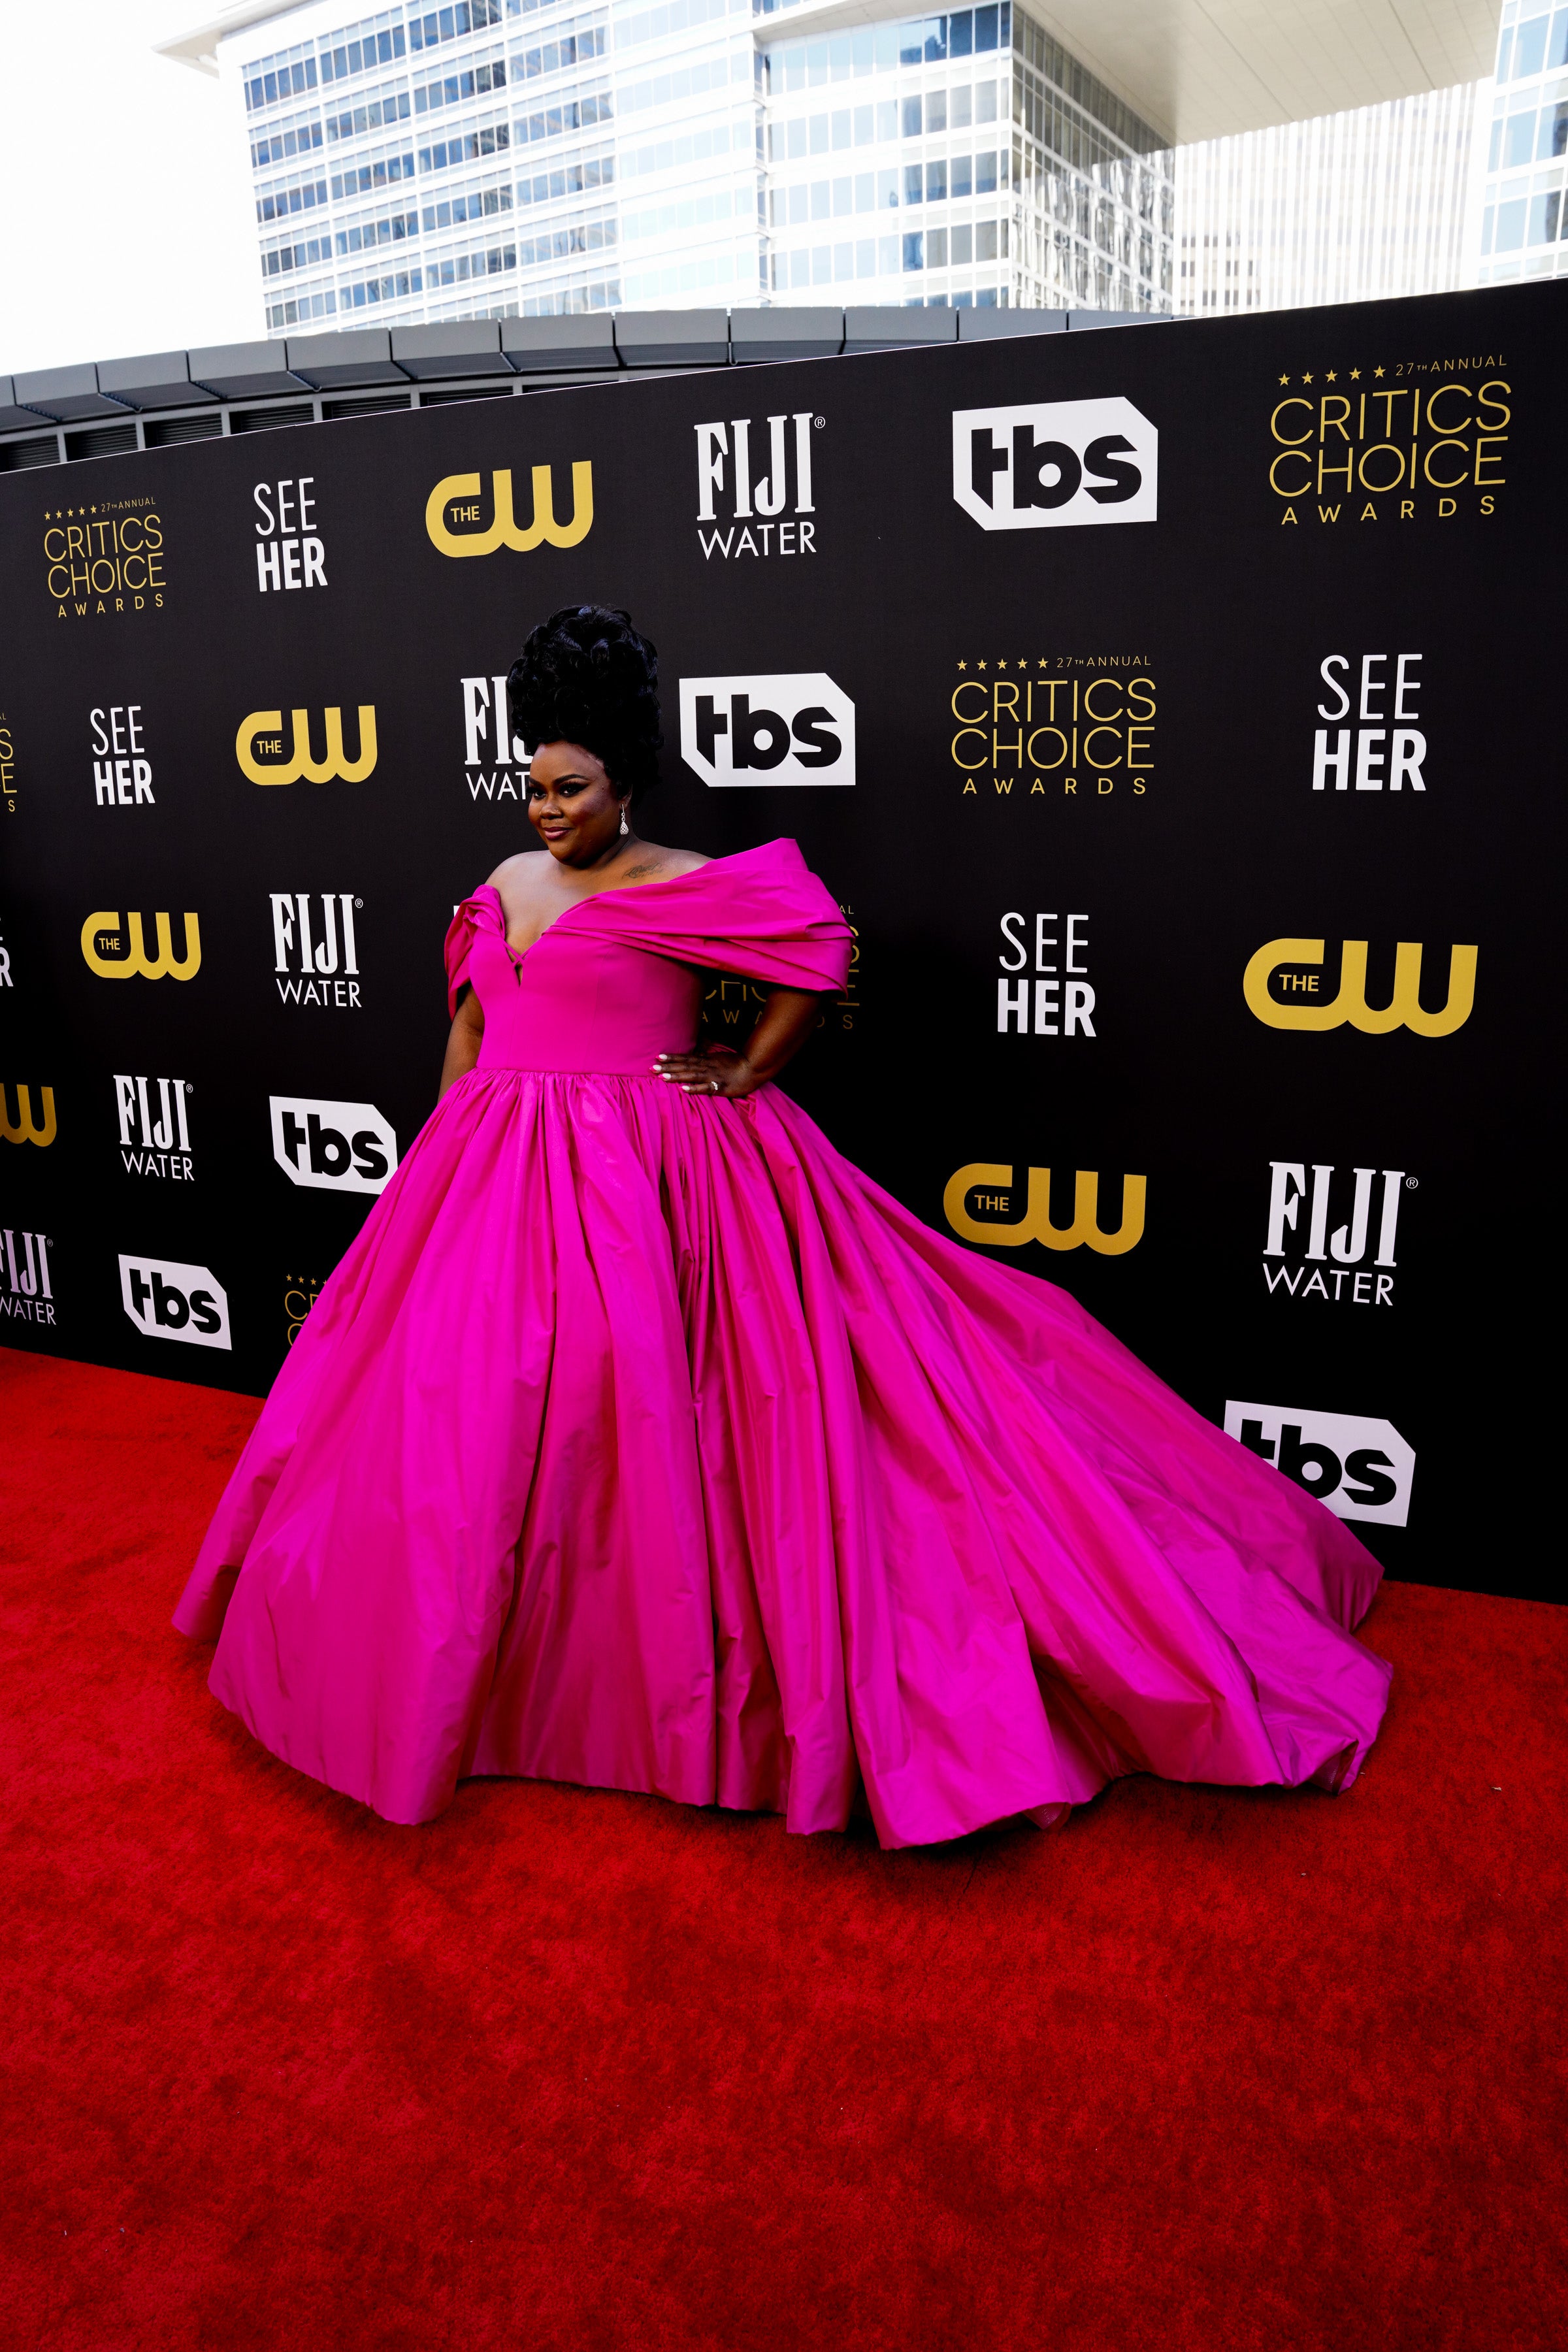 Byer wore a dramatic fuchsia pink gown